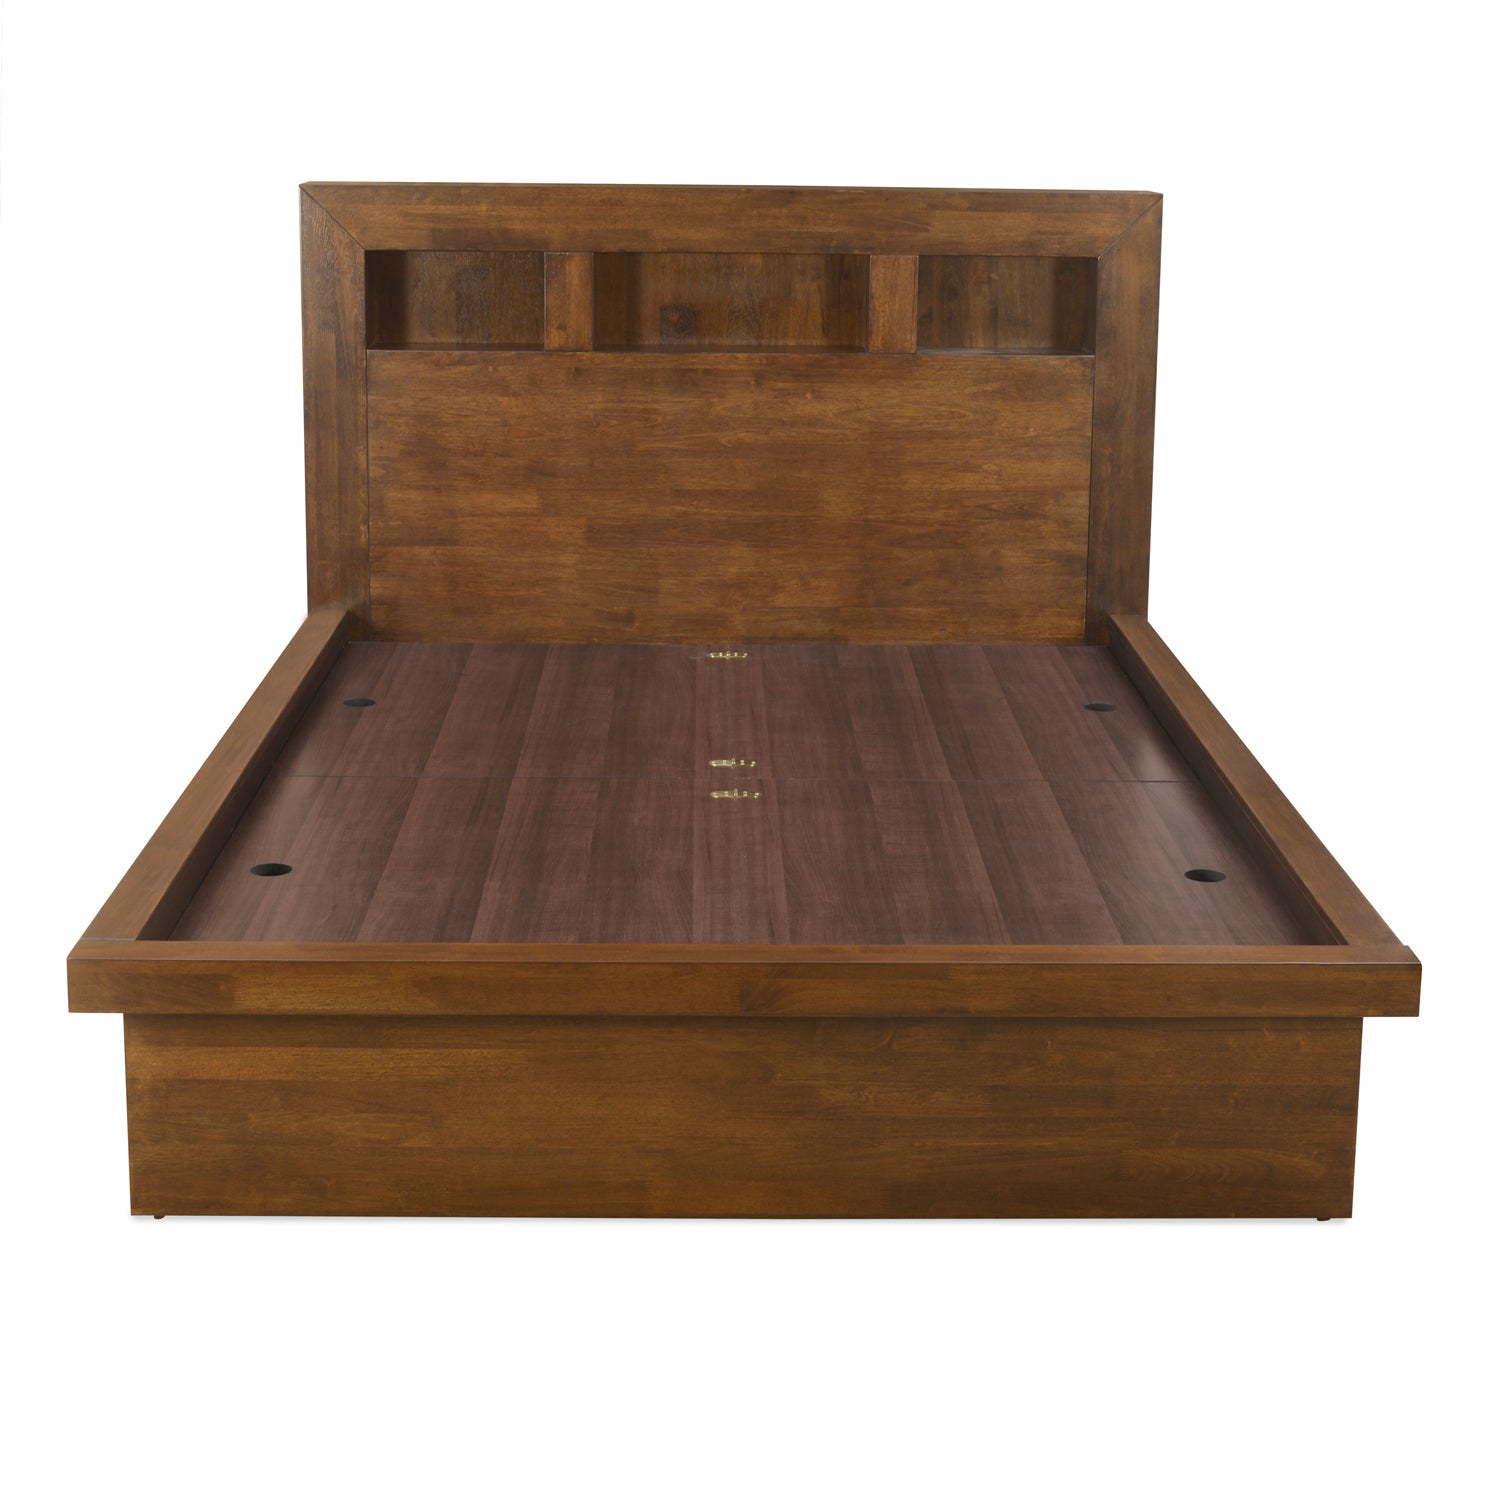 Lincoln King Bed with Box Storage (Walnut)